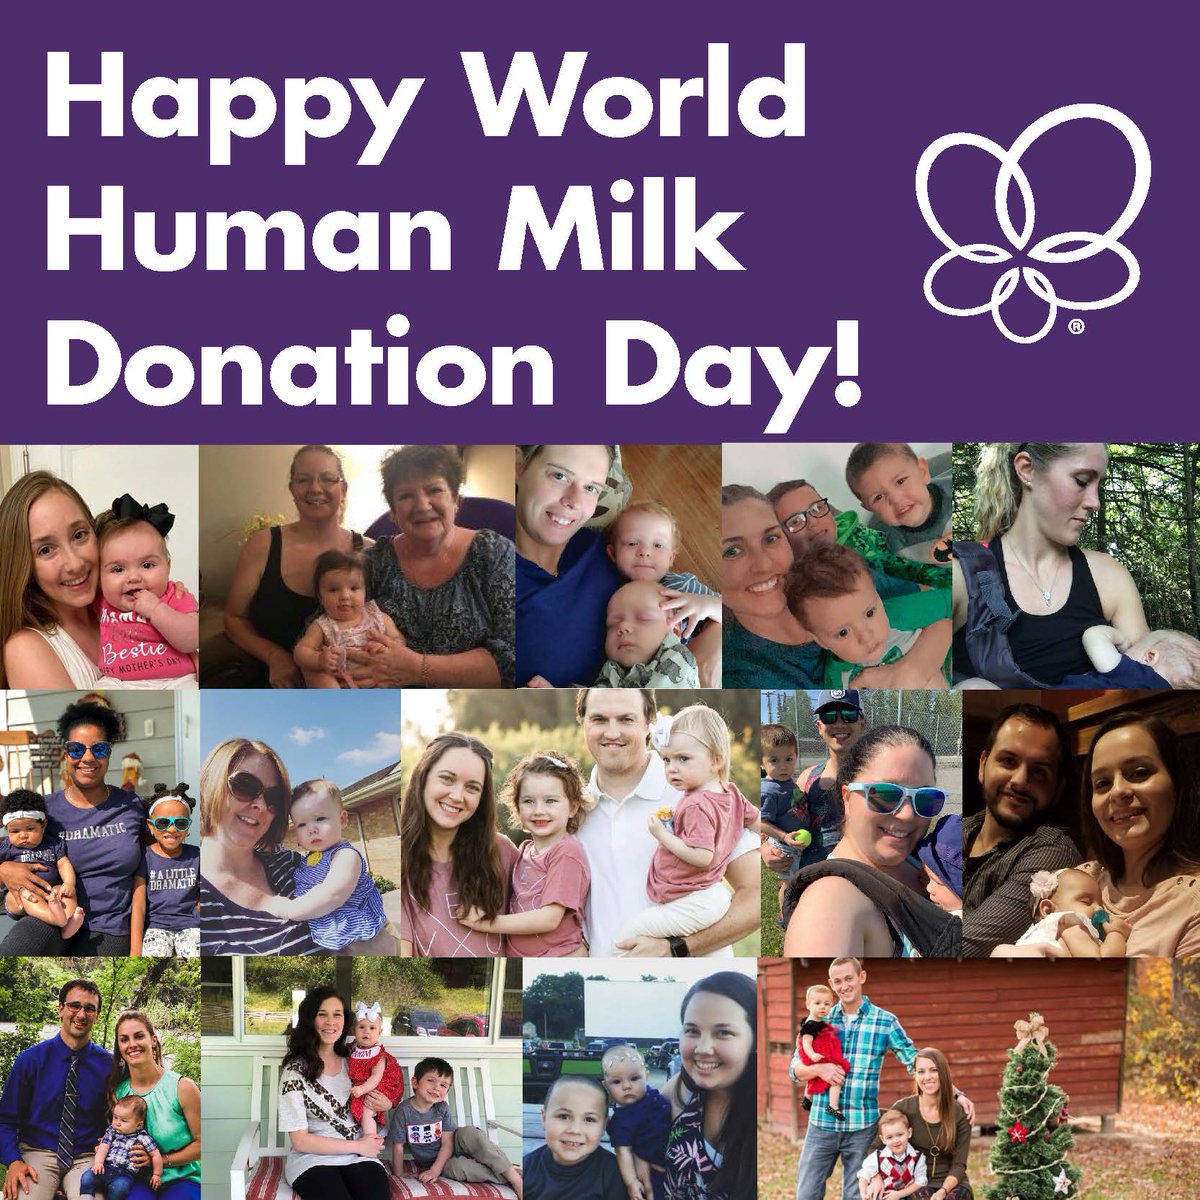 Today, we honor the incredible #humanmilkchampions who make a difference in the lives of babies and families every day. Throughout this week, join us as we spotlight their inspiring stories and celebrate the power of human milk donation.
#WorldHumanMilkDonationDay